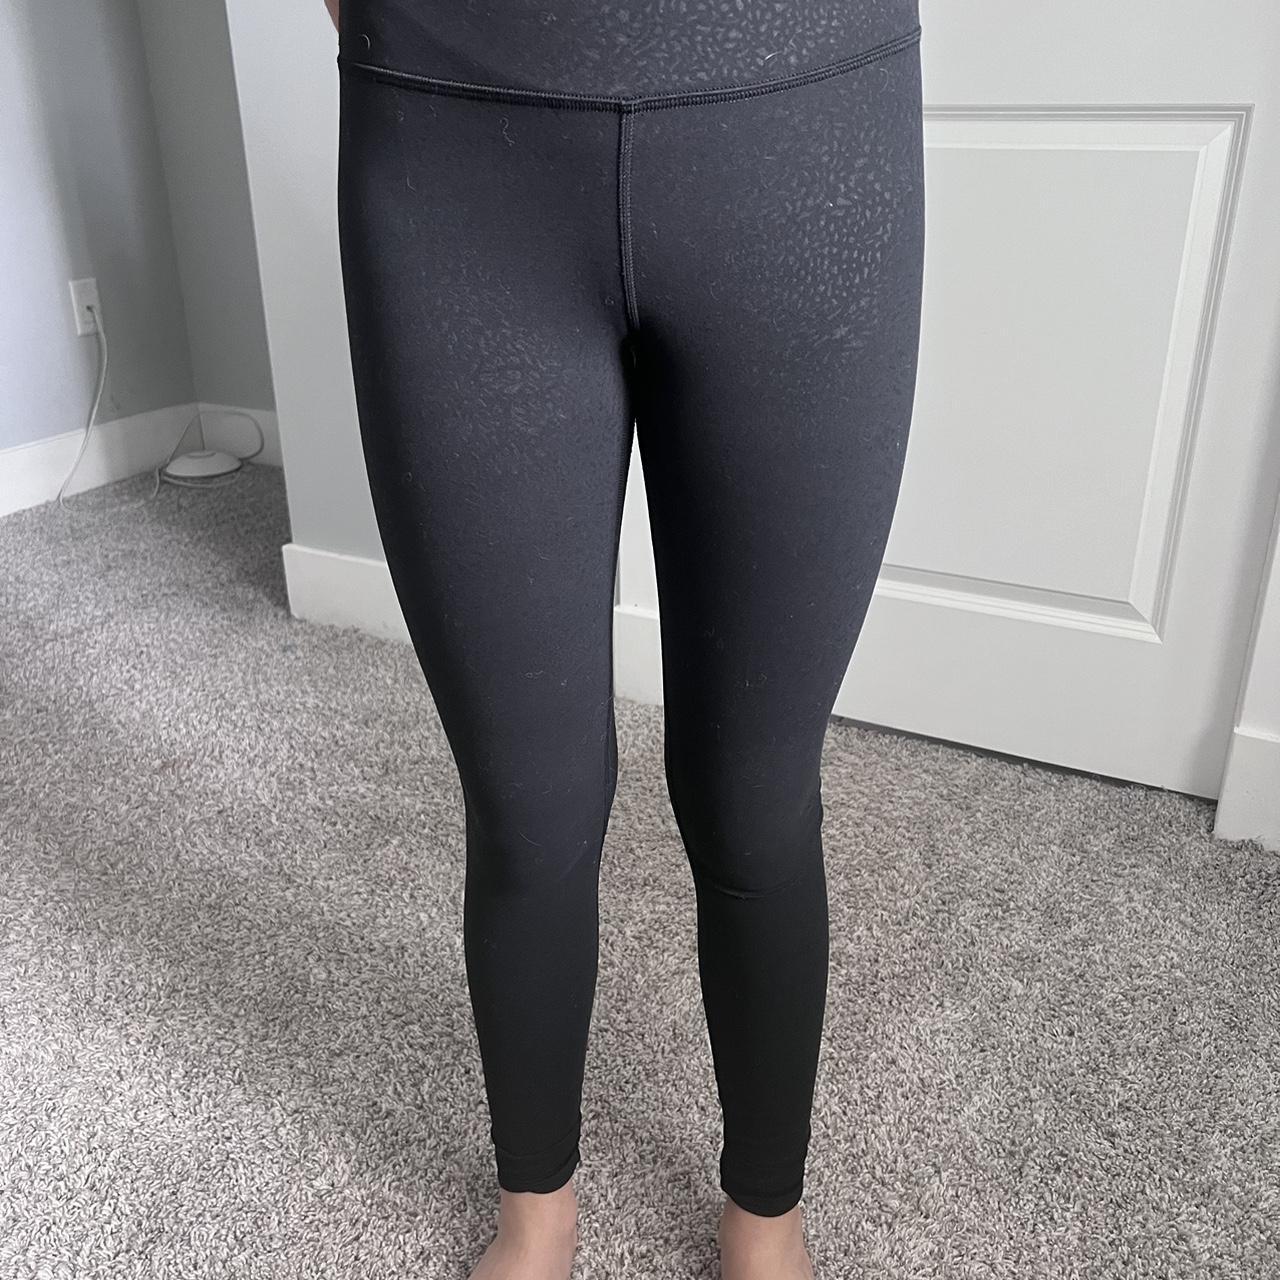 lululemon leggings, size 2 but could fit 0 or 4.